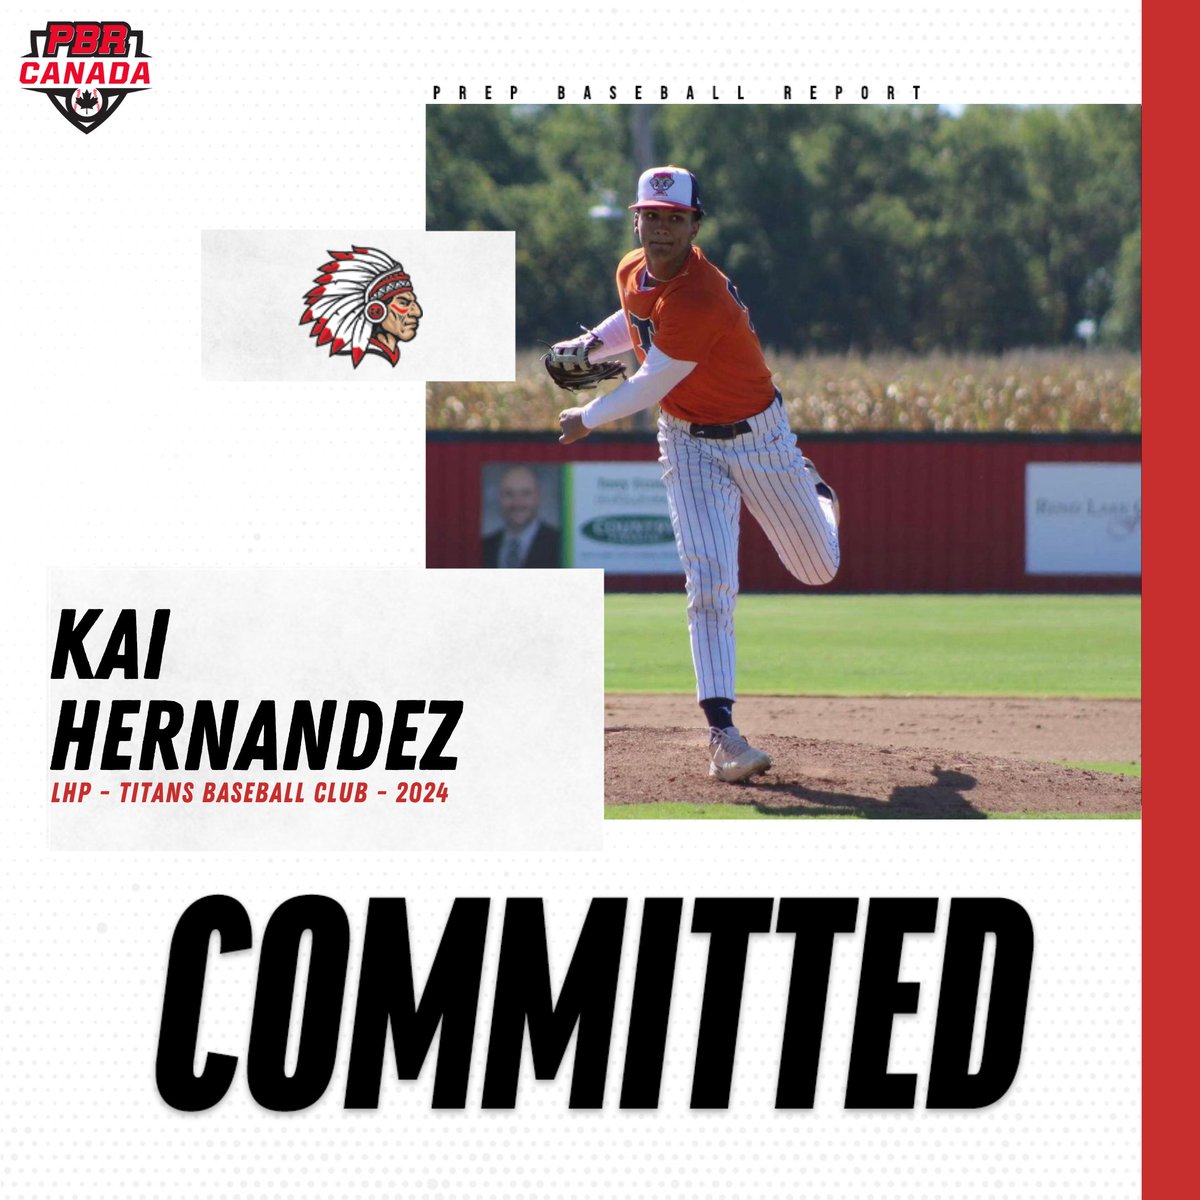 🚨𝐂𝐎𝐌𝐌𝐈𝐓𝐌𝐄𝐍𝐓 𝐀𝐋𝐄𝐑𝐓🚨 '24 LHP Kai Hernandez (@KaiHernandez06) has announced his commitment to Rend Lake College. @RLC_Baseball || #OffTheBoard🇨🇦